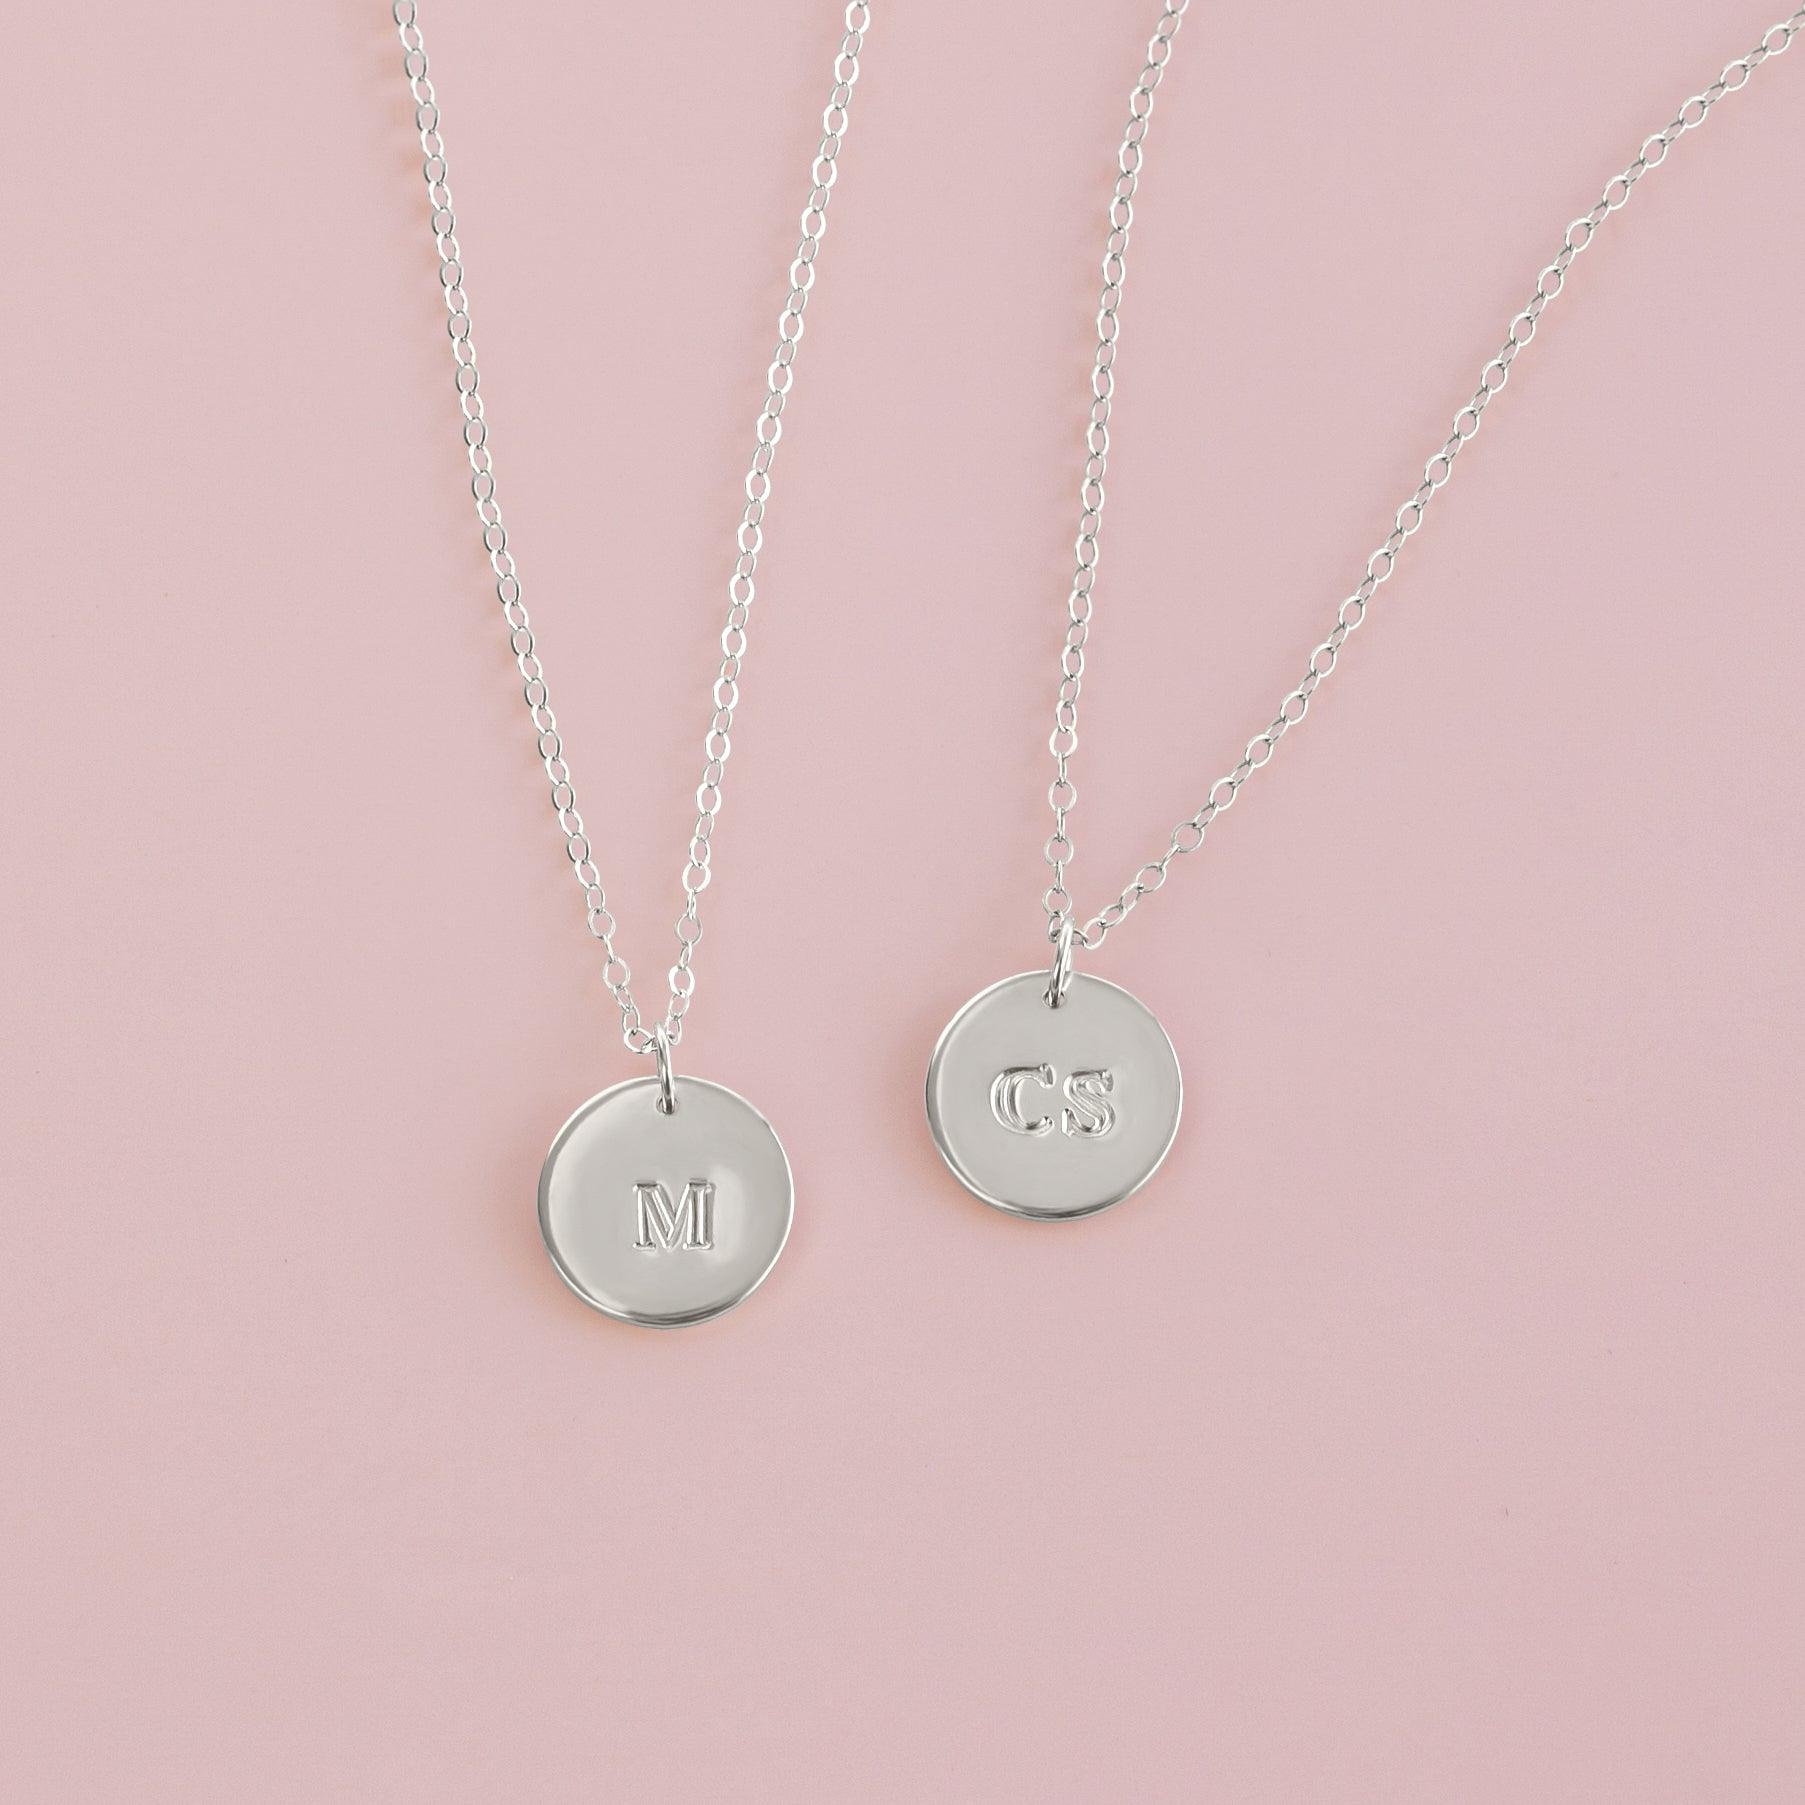 Cara Initial Necklace - Nolia Jewelry - Meaningful + Sustainably Handcrafted Jewelry